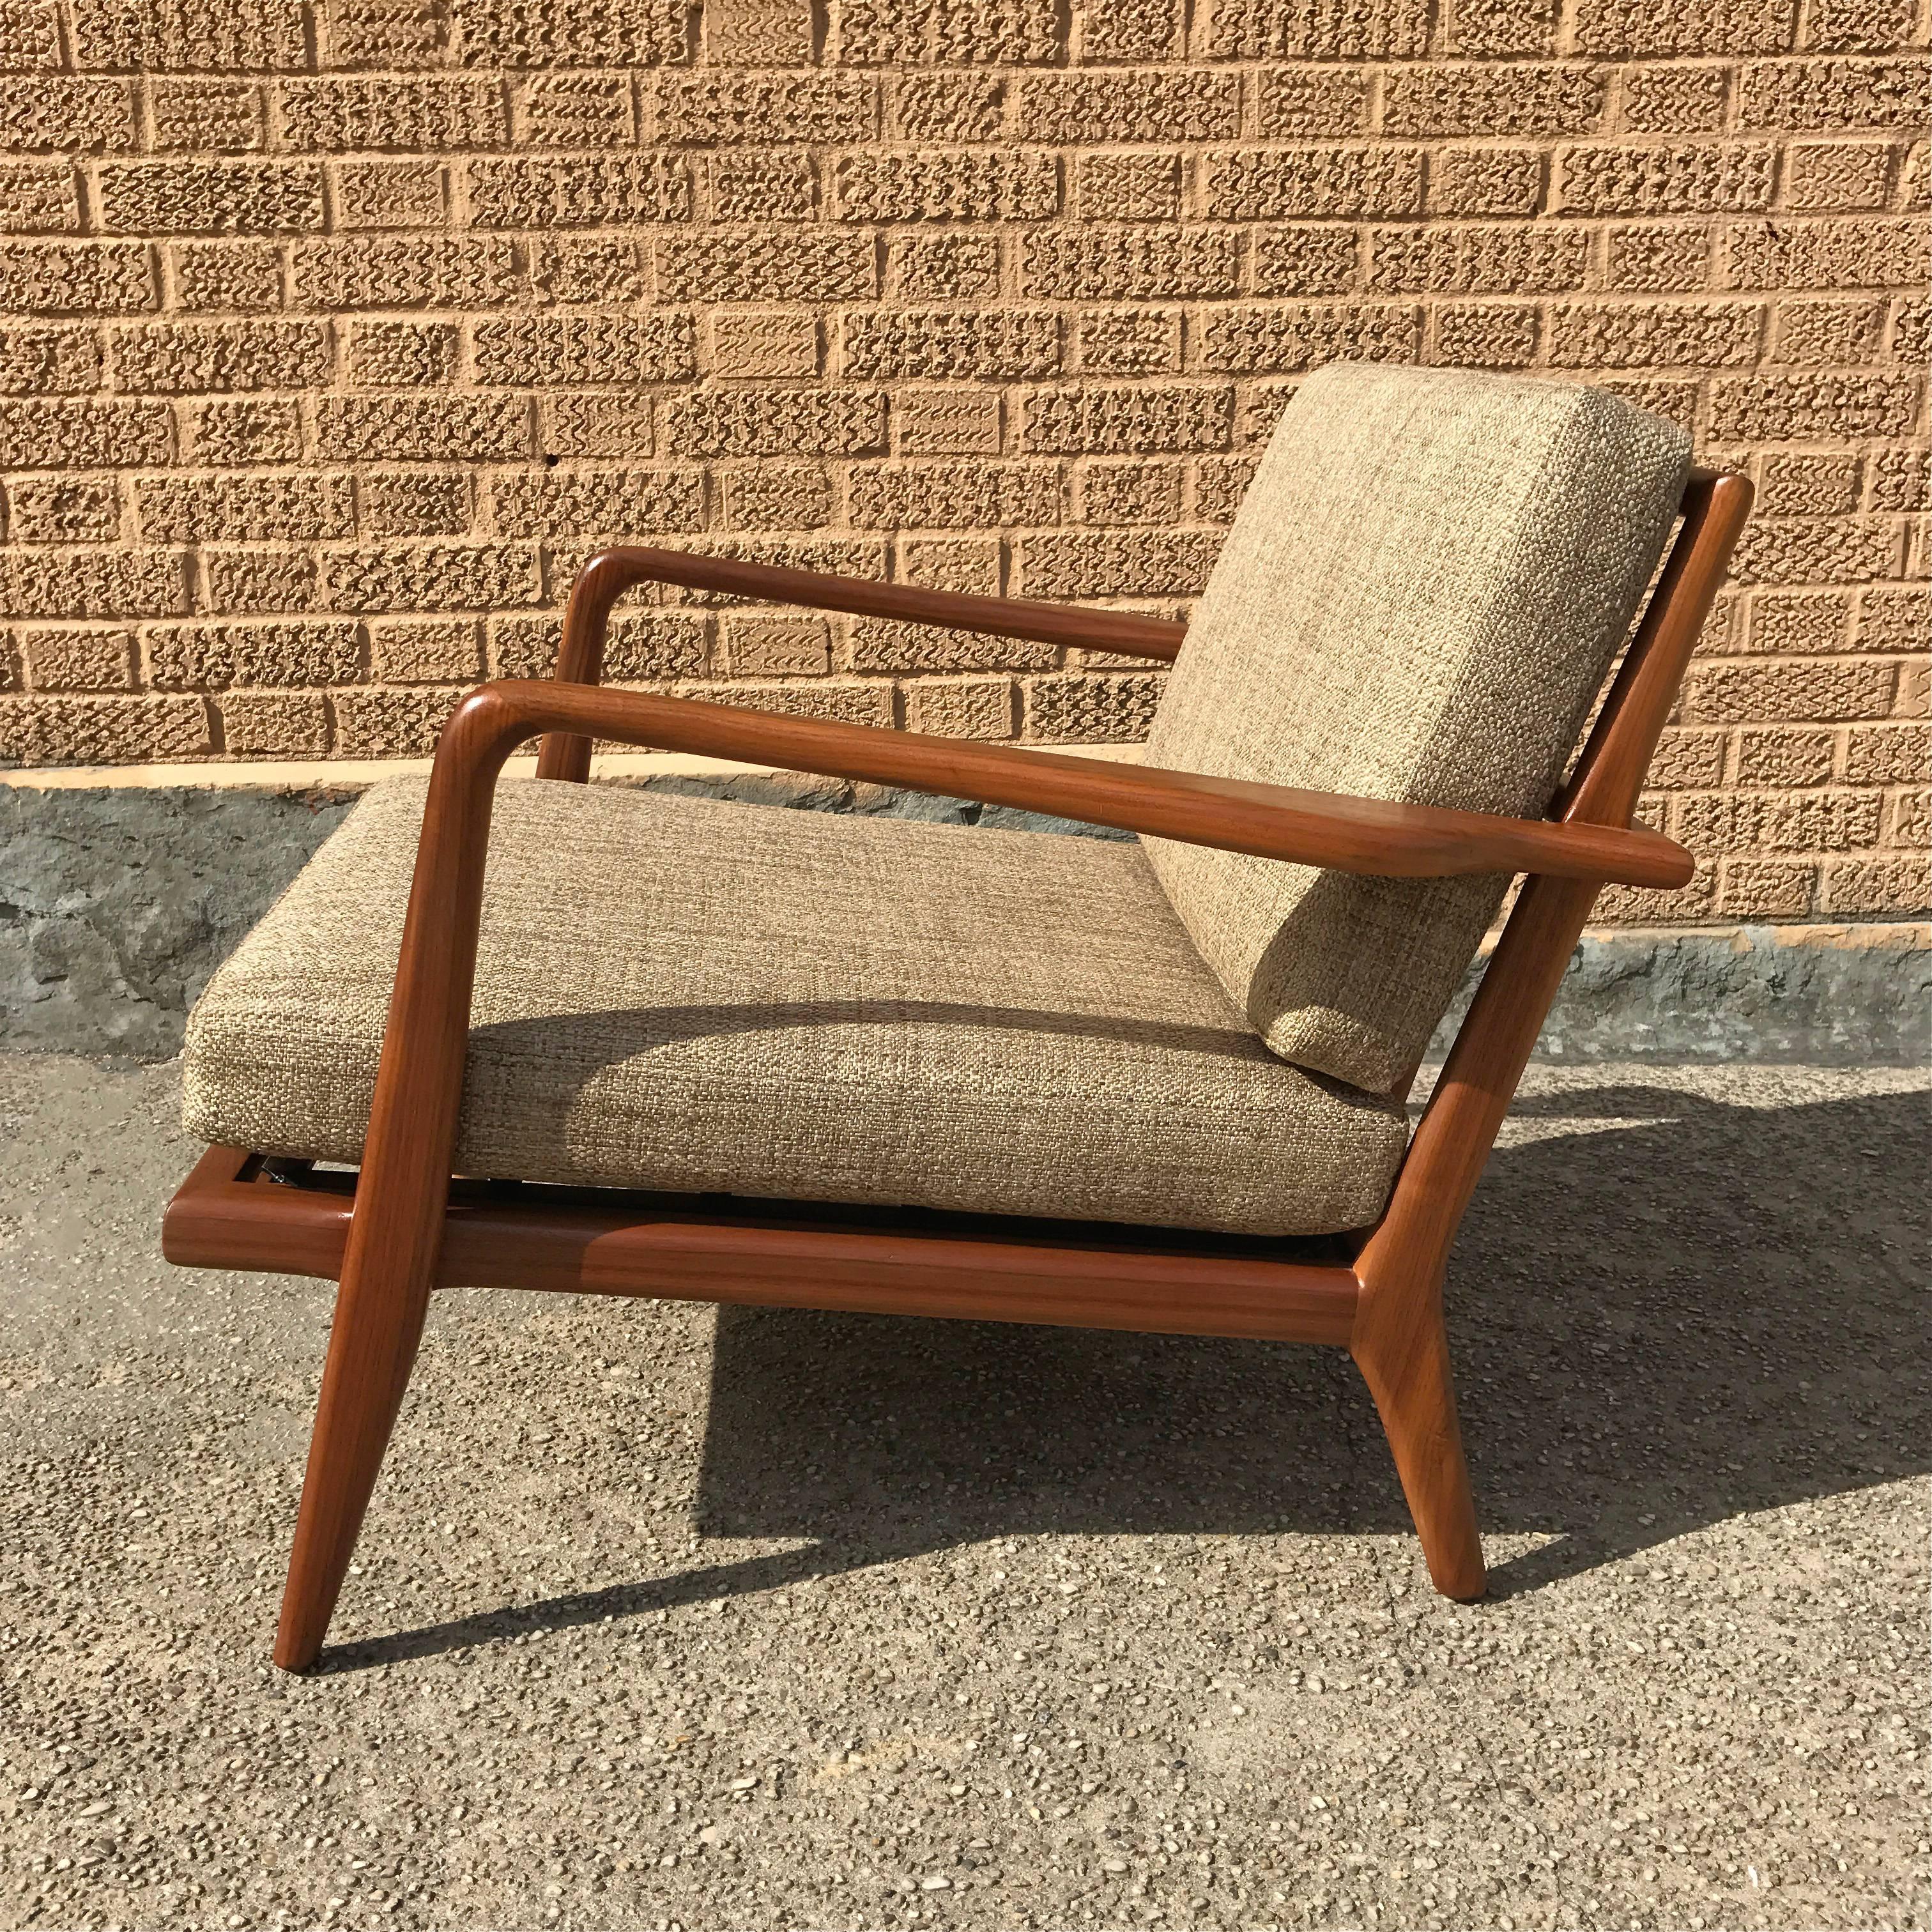 Pair of Mid-Century Modern Walnut Lounge Chairs by Mel Smilow 1